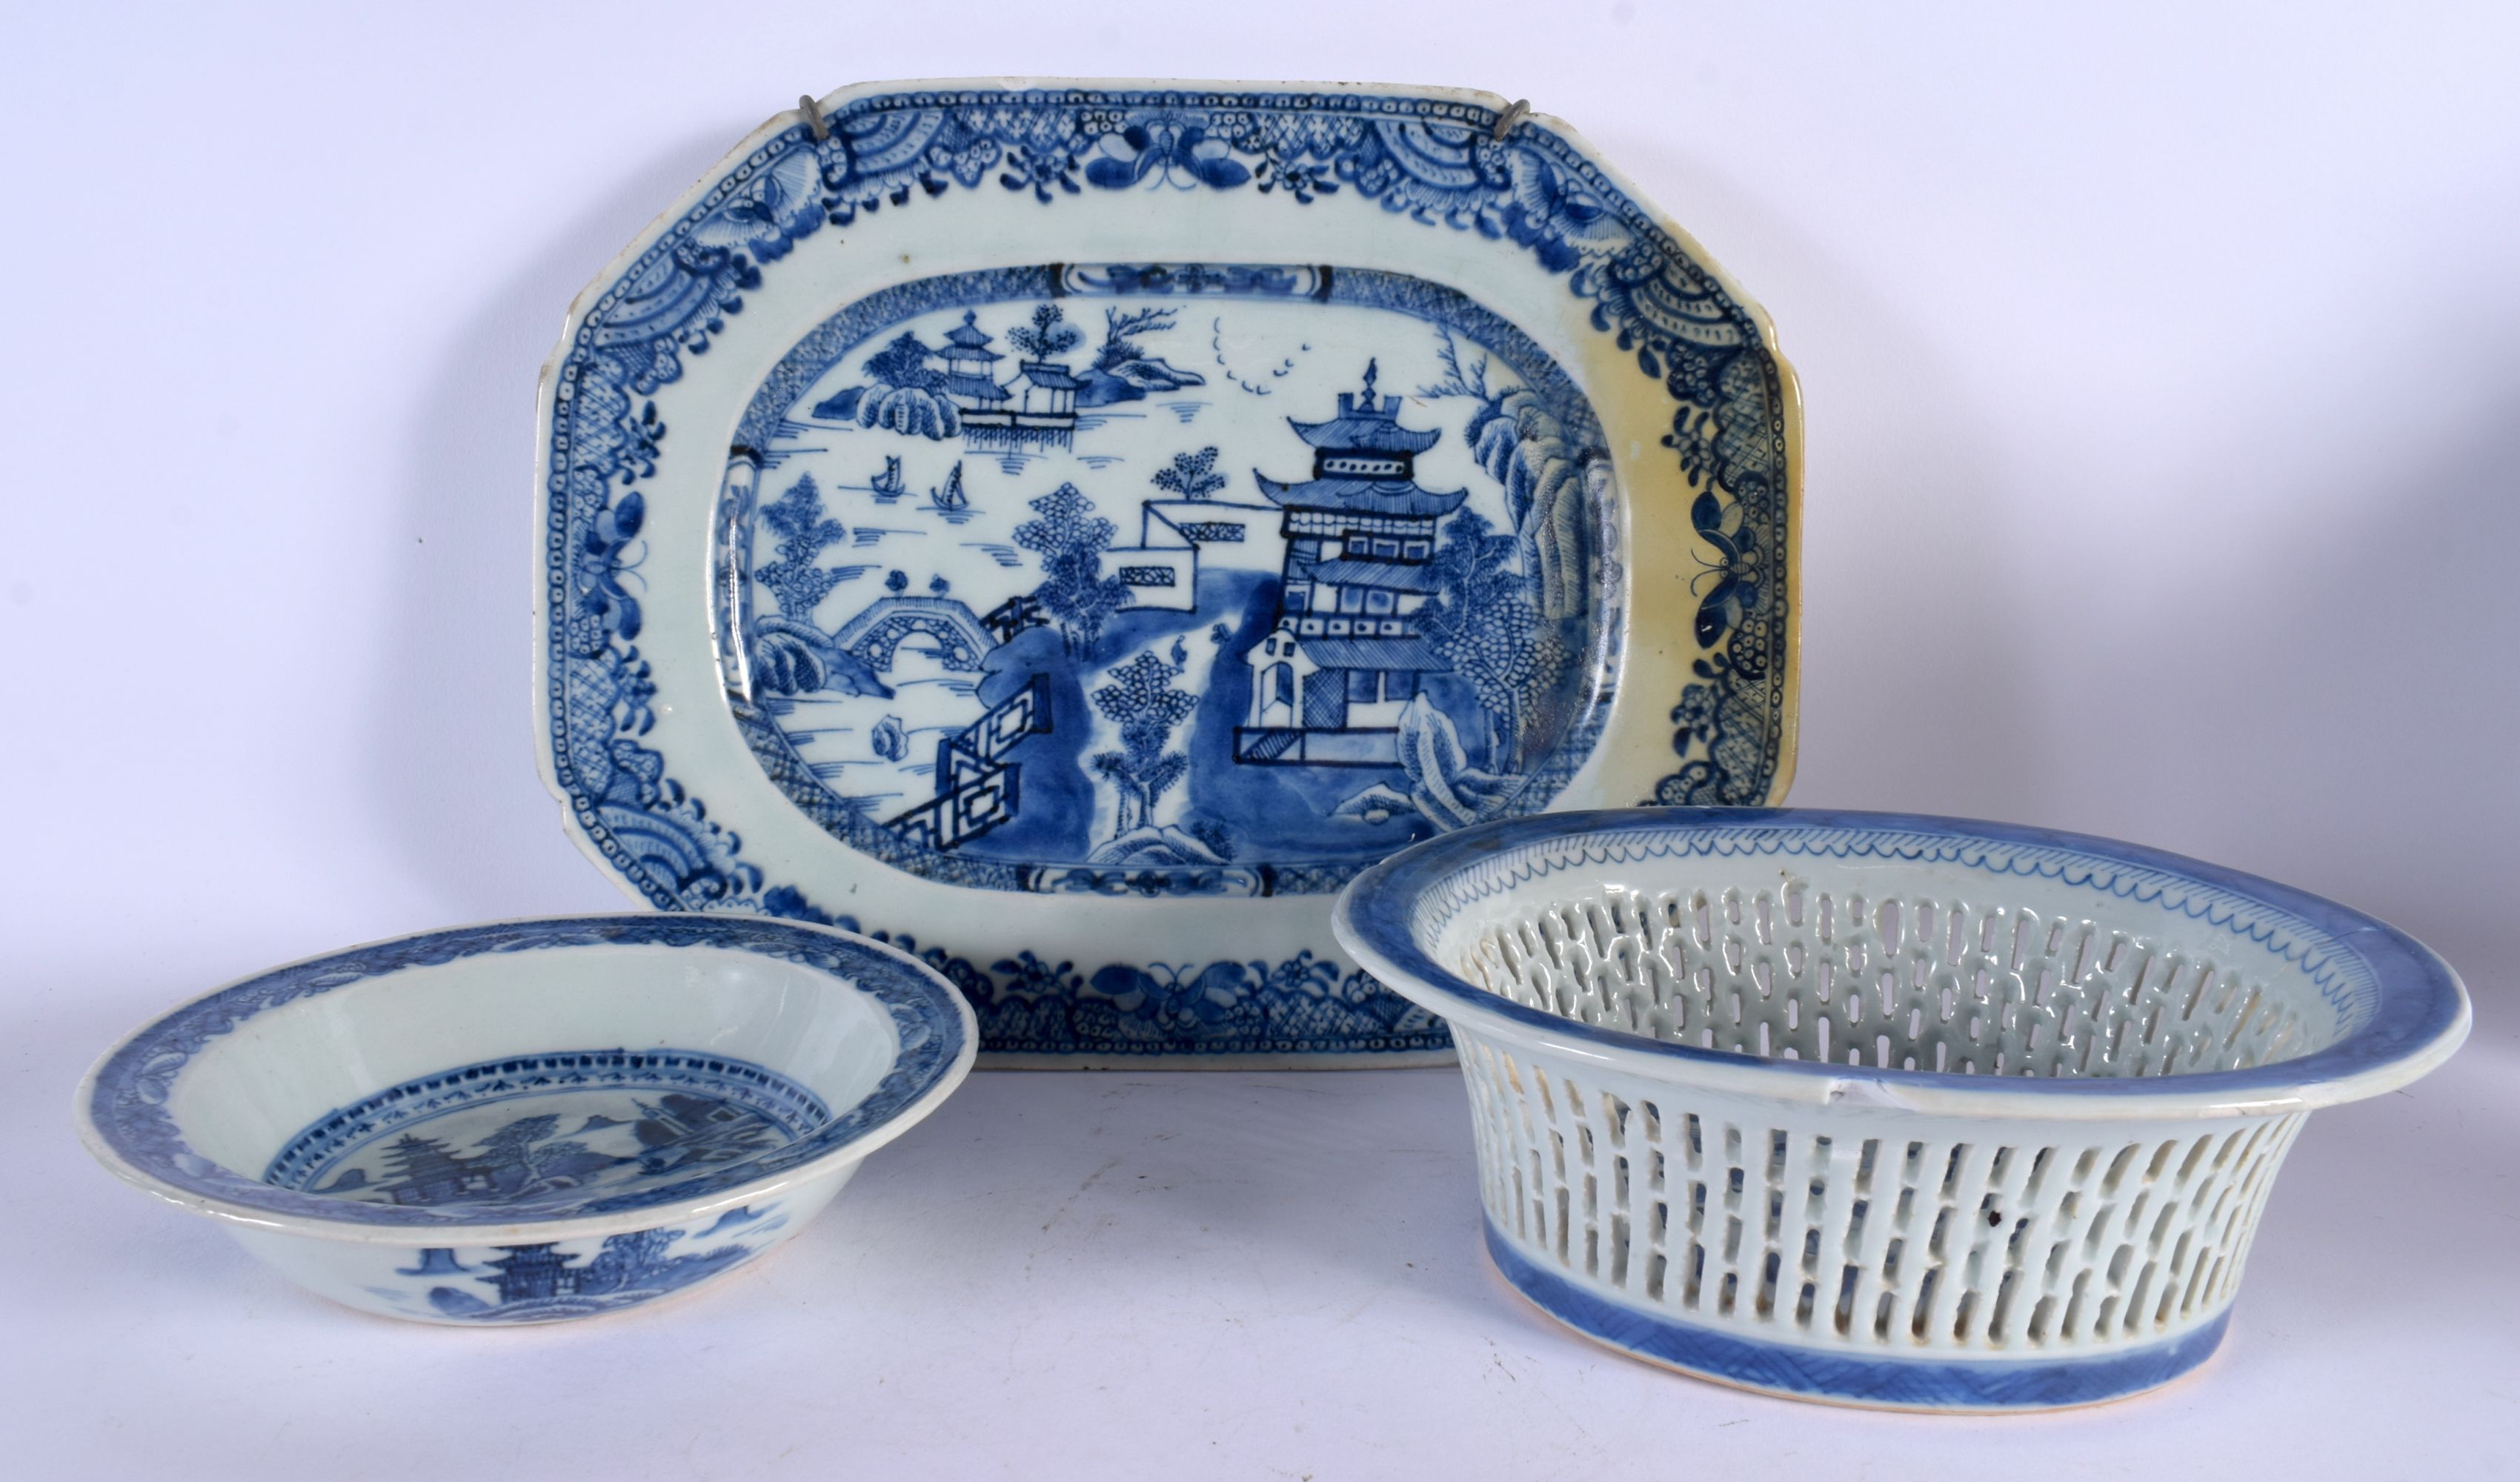 A LARGE 18TH CENTURY CHINESE EXPORT BLUE AND WHITE PORCELAIN DISH together with a basket & pudding b